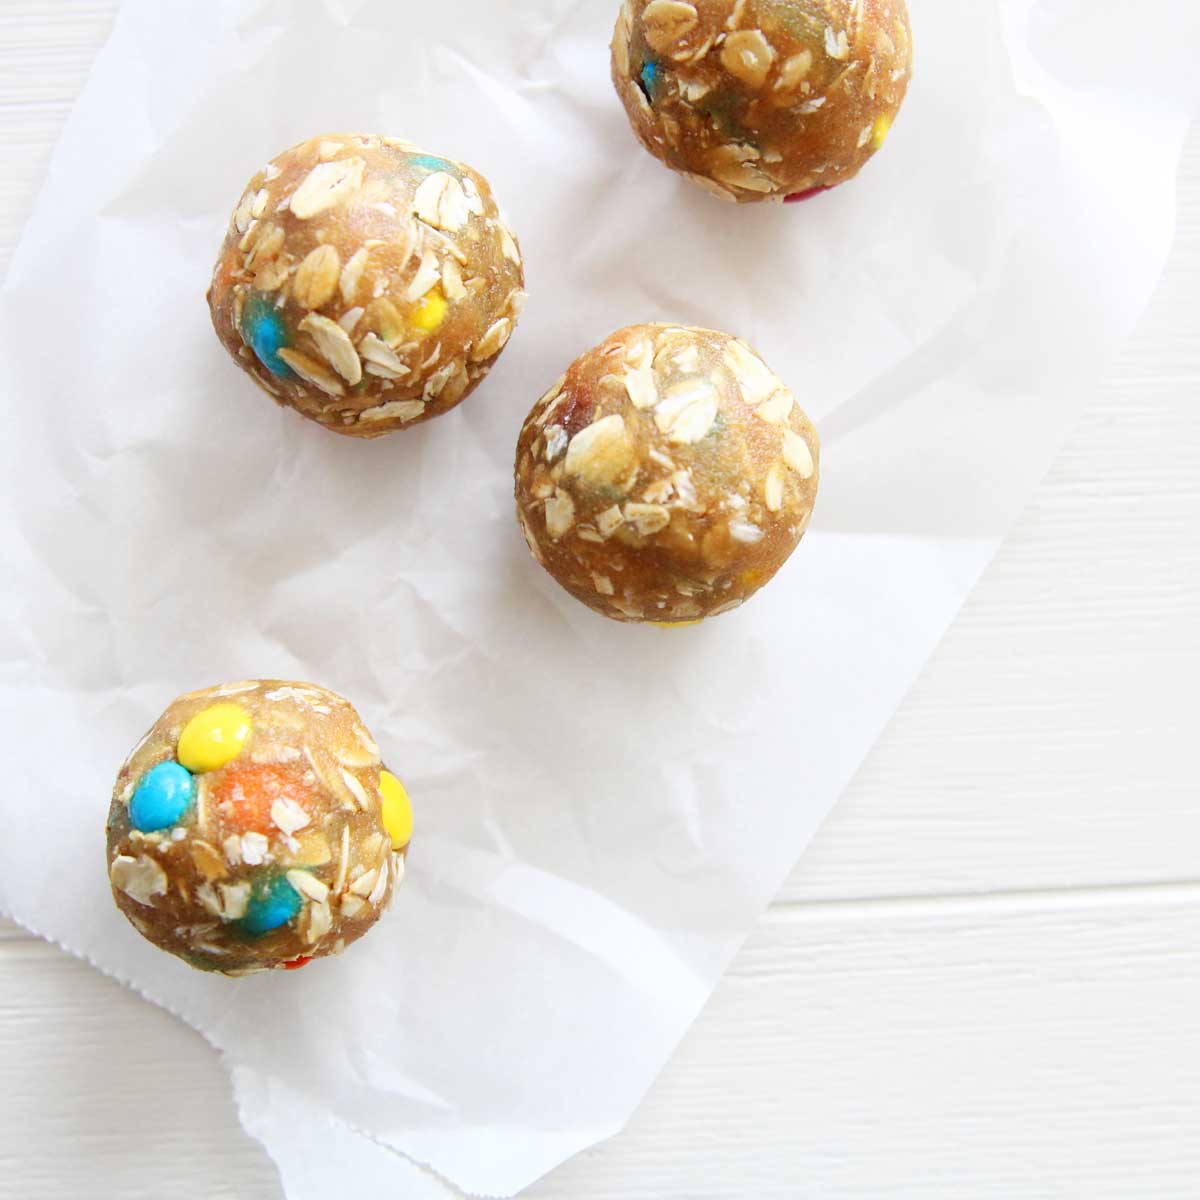 Healthy Monster Cookie Protein Balls Made with Collagen Peptides - Monster Cookie Protein Balls